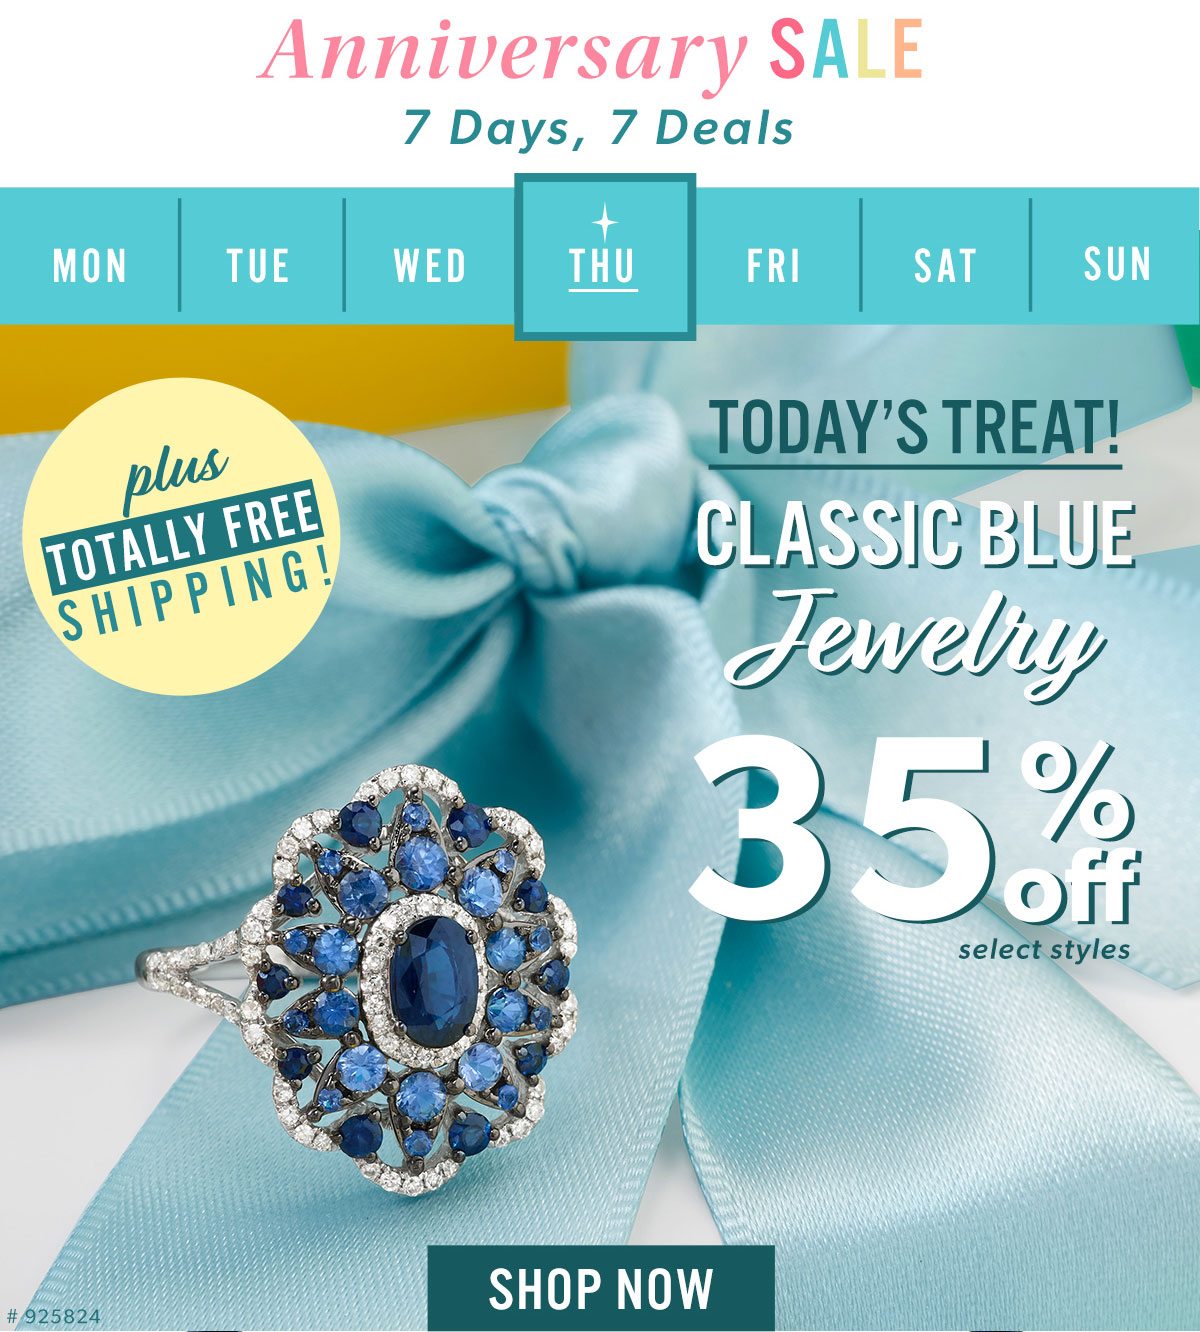 Today's Treat! Classic Blue Jewelry. 35% Off Select Styles. Shop Now